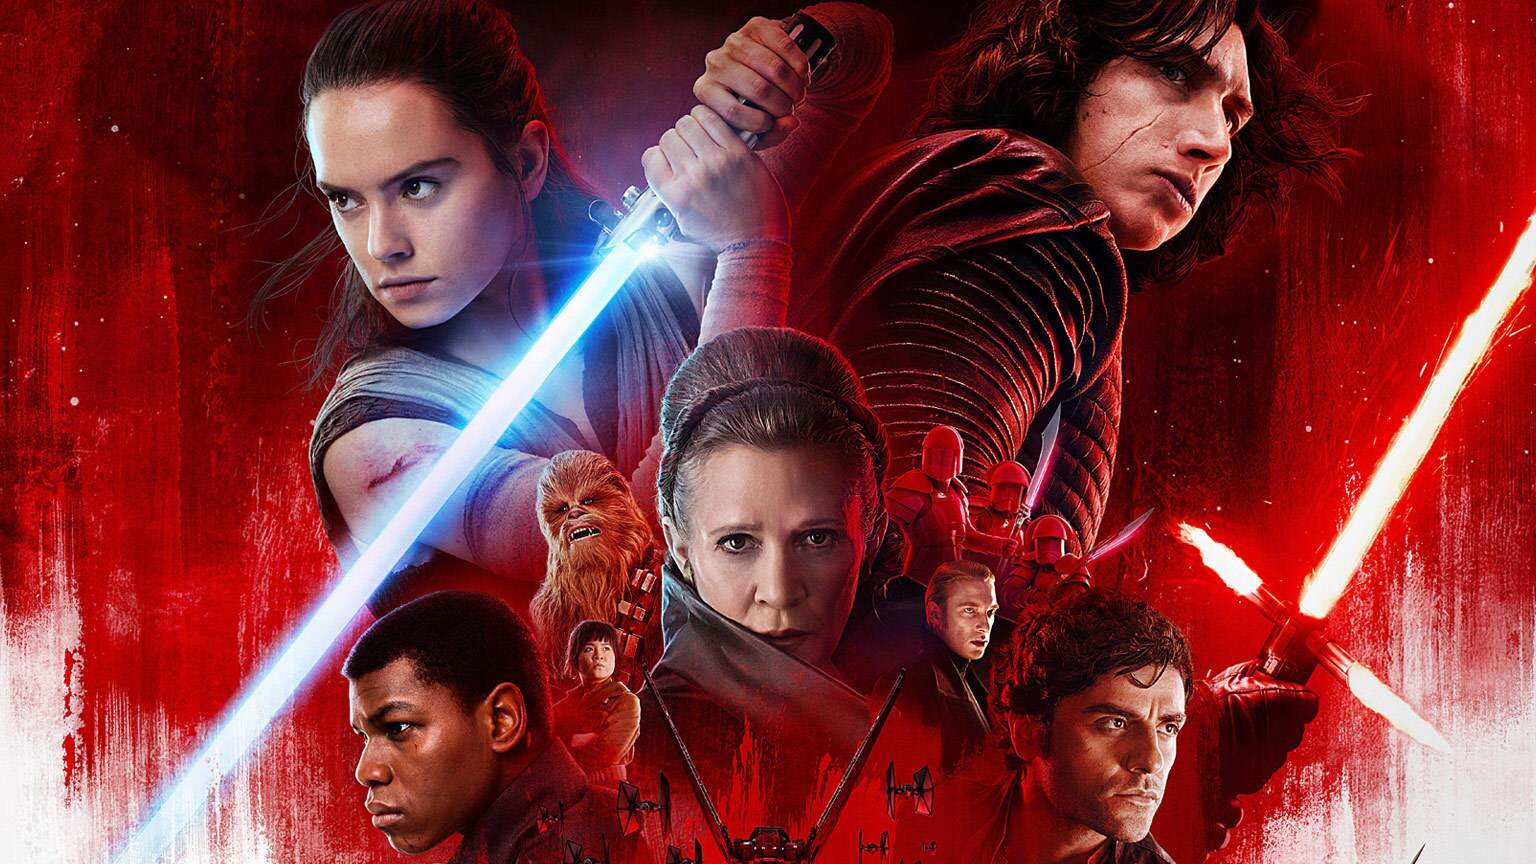 Poll: Which Character Are You Most Excited to See in Star Wars: The Last Jedi?